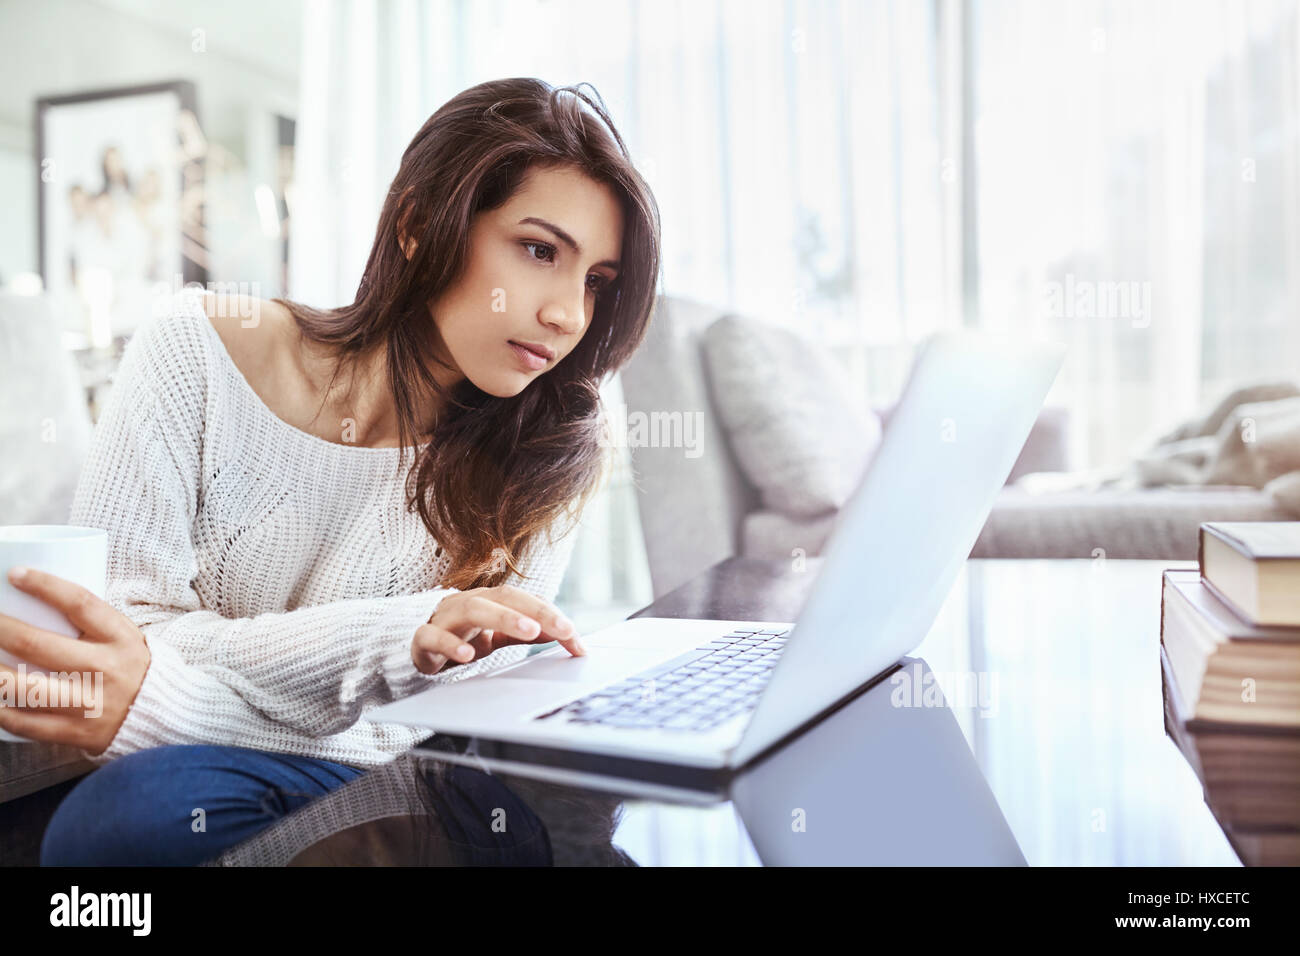 Serious woman using laptop at dining table Stock Photo